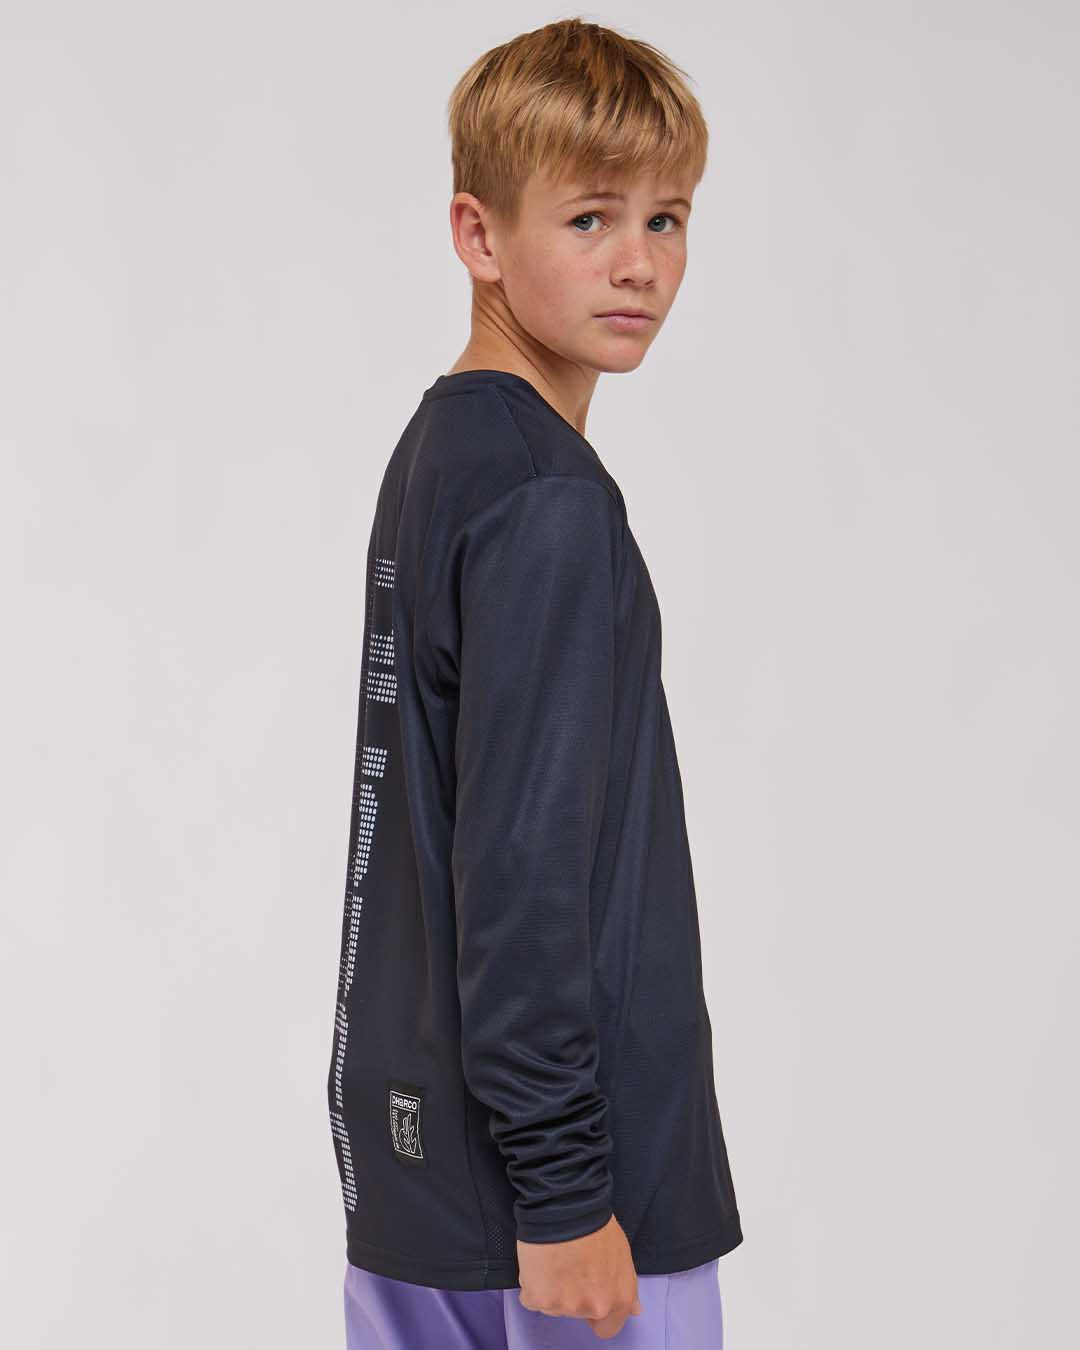 Youth Gravity Jersey | Stealth (new)